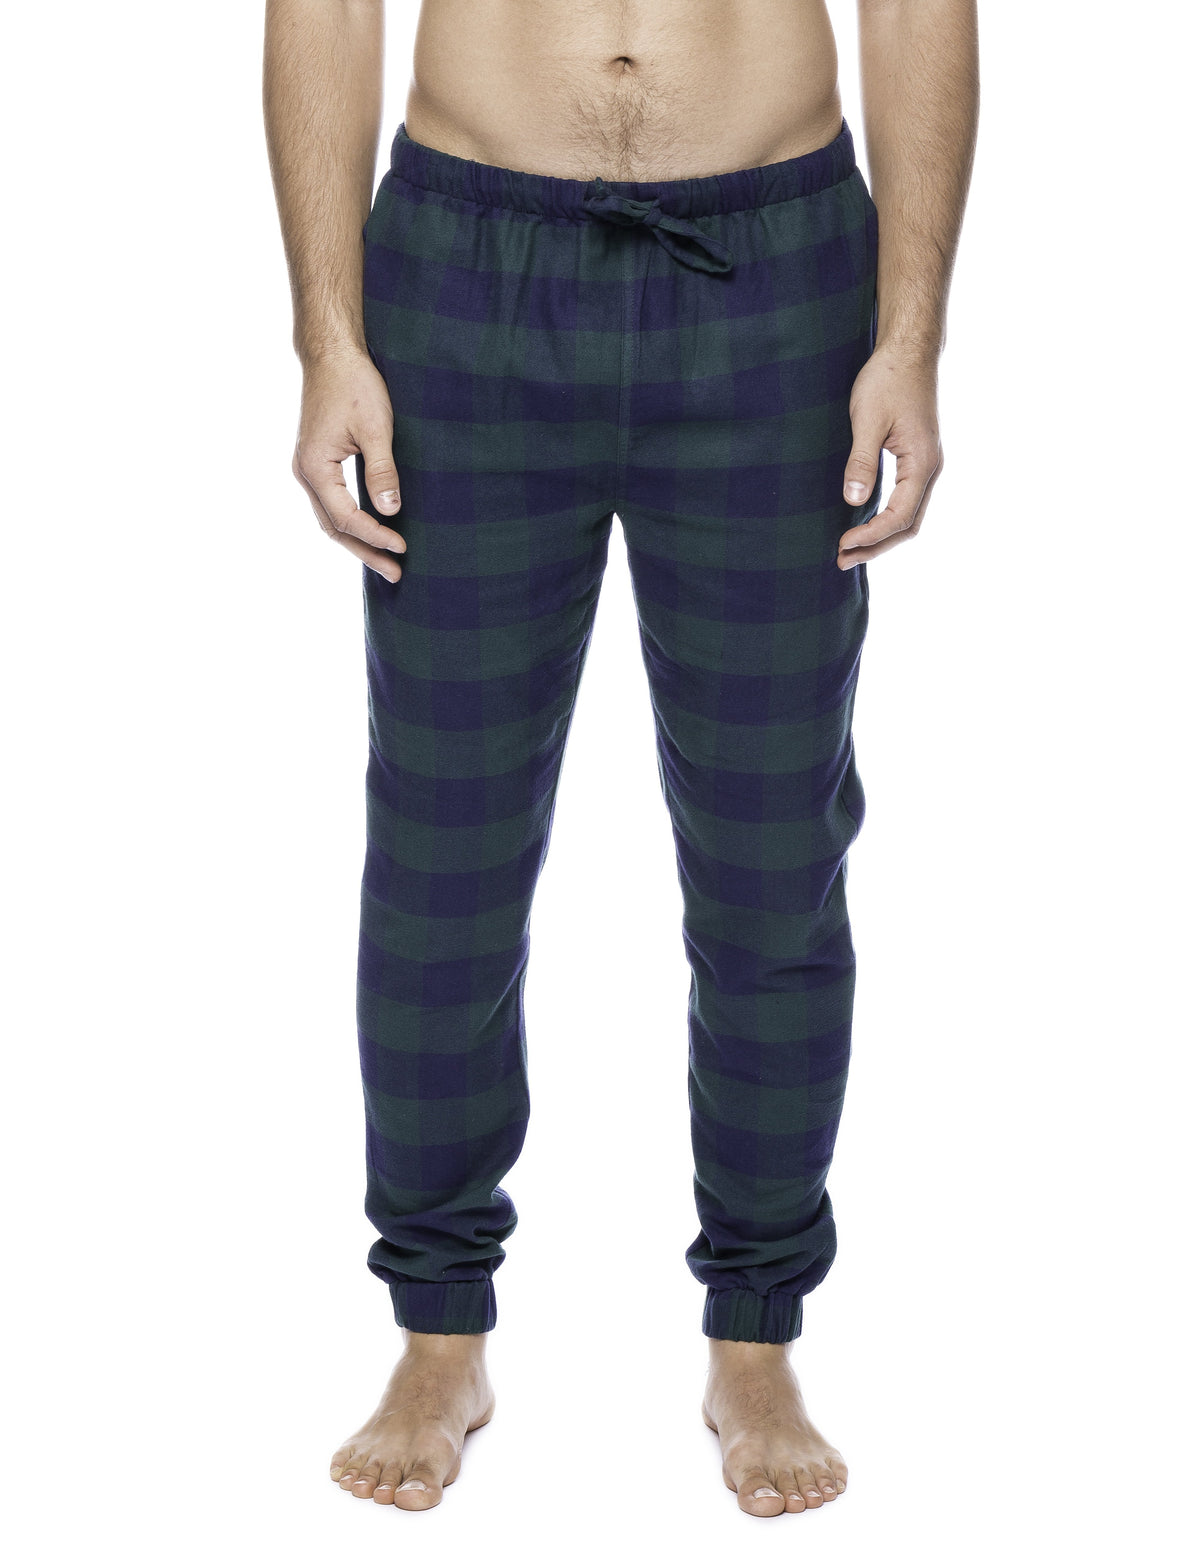 Mens 100% Cotton Flannel Jogger Lounge Pants - Gingham Green/Navy